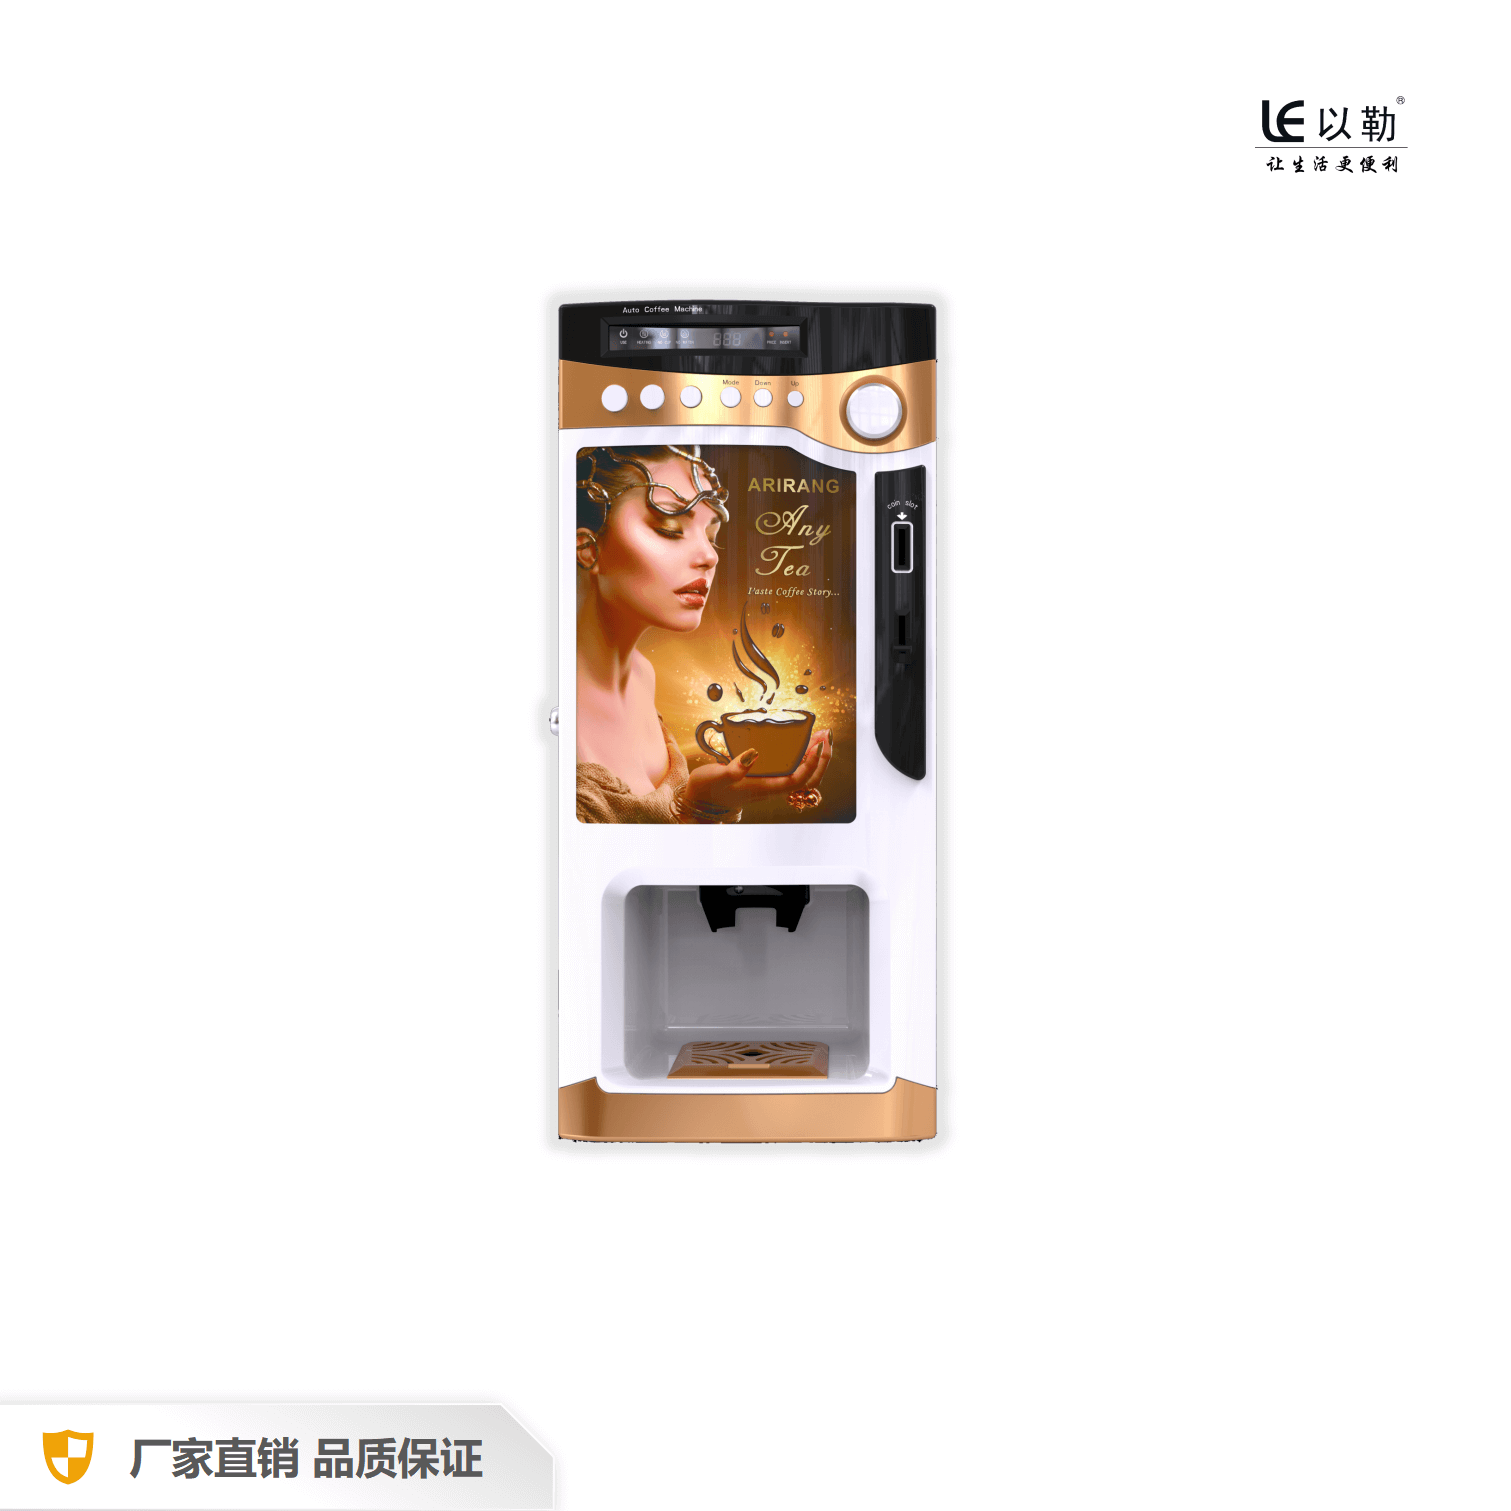 Small Instant Coffee Vending Machine With Cup Dispenser 